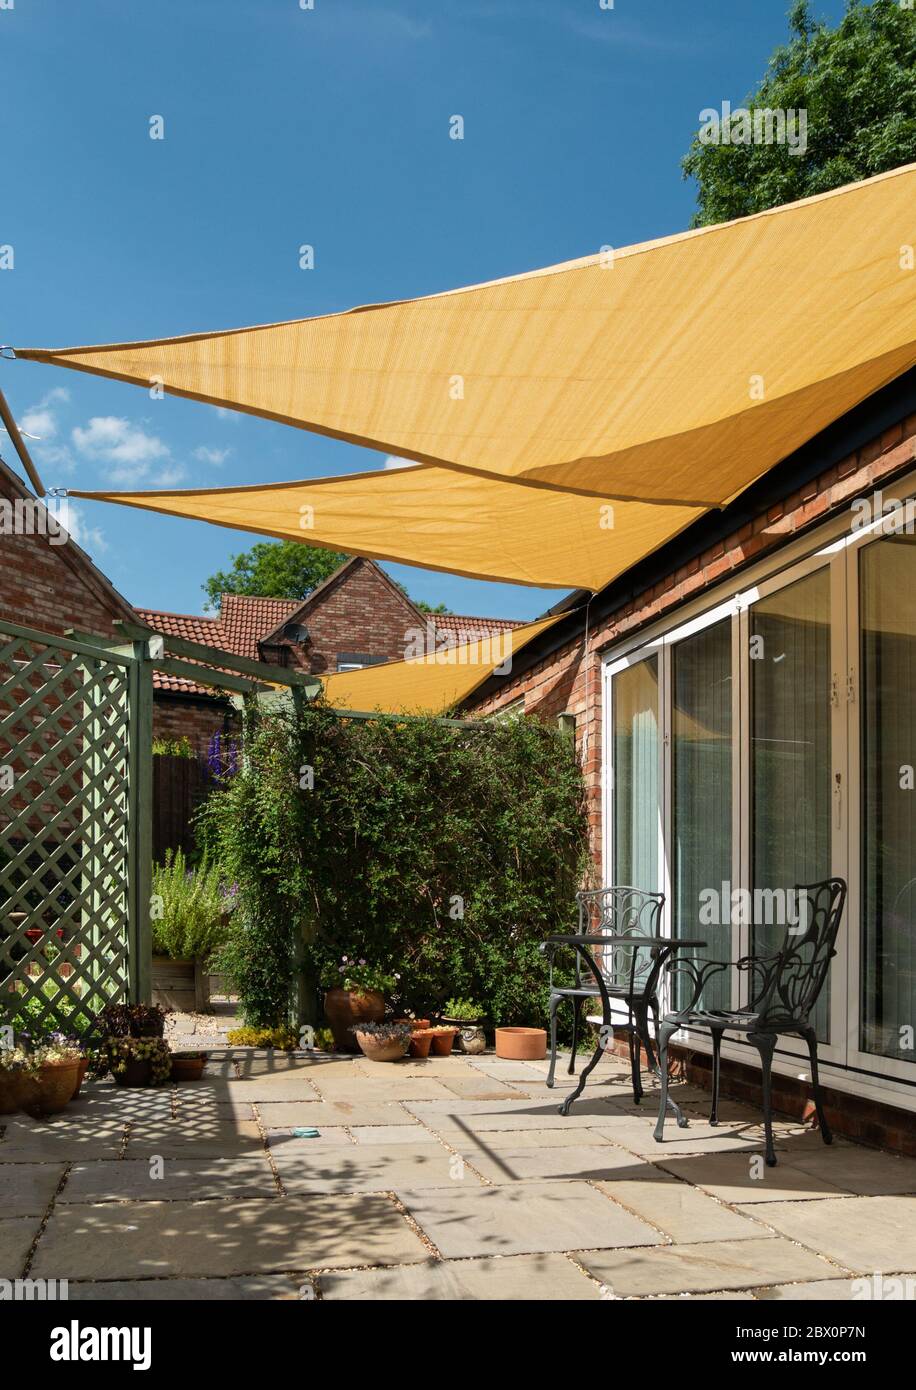 https://c8.alamy.com/comp/2BX0P7N/small-garden-patio-with-yellow-triangular-sail-shade-sunshades-and-blue-sky-above-on-a-sunny-summer-day-england-uk-2BX0P7N.jpg